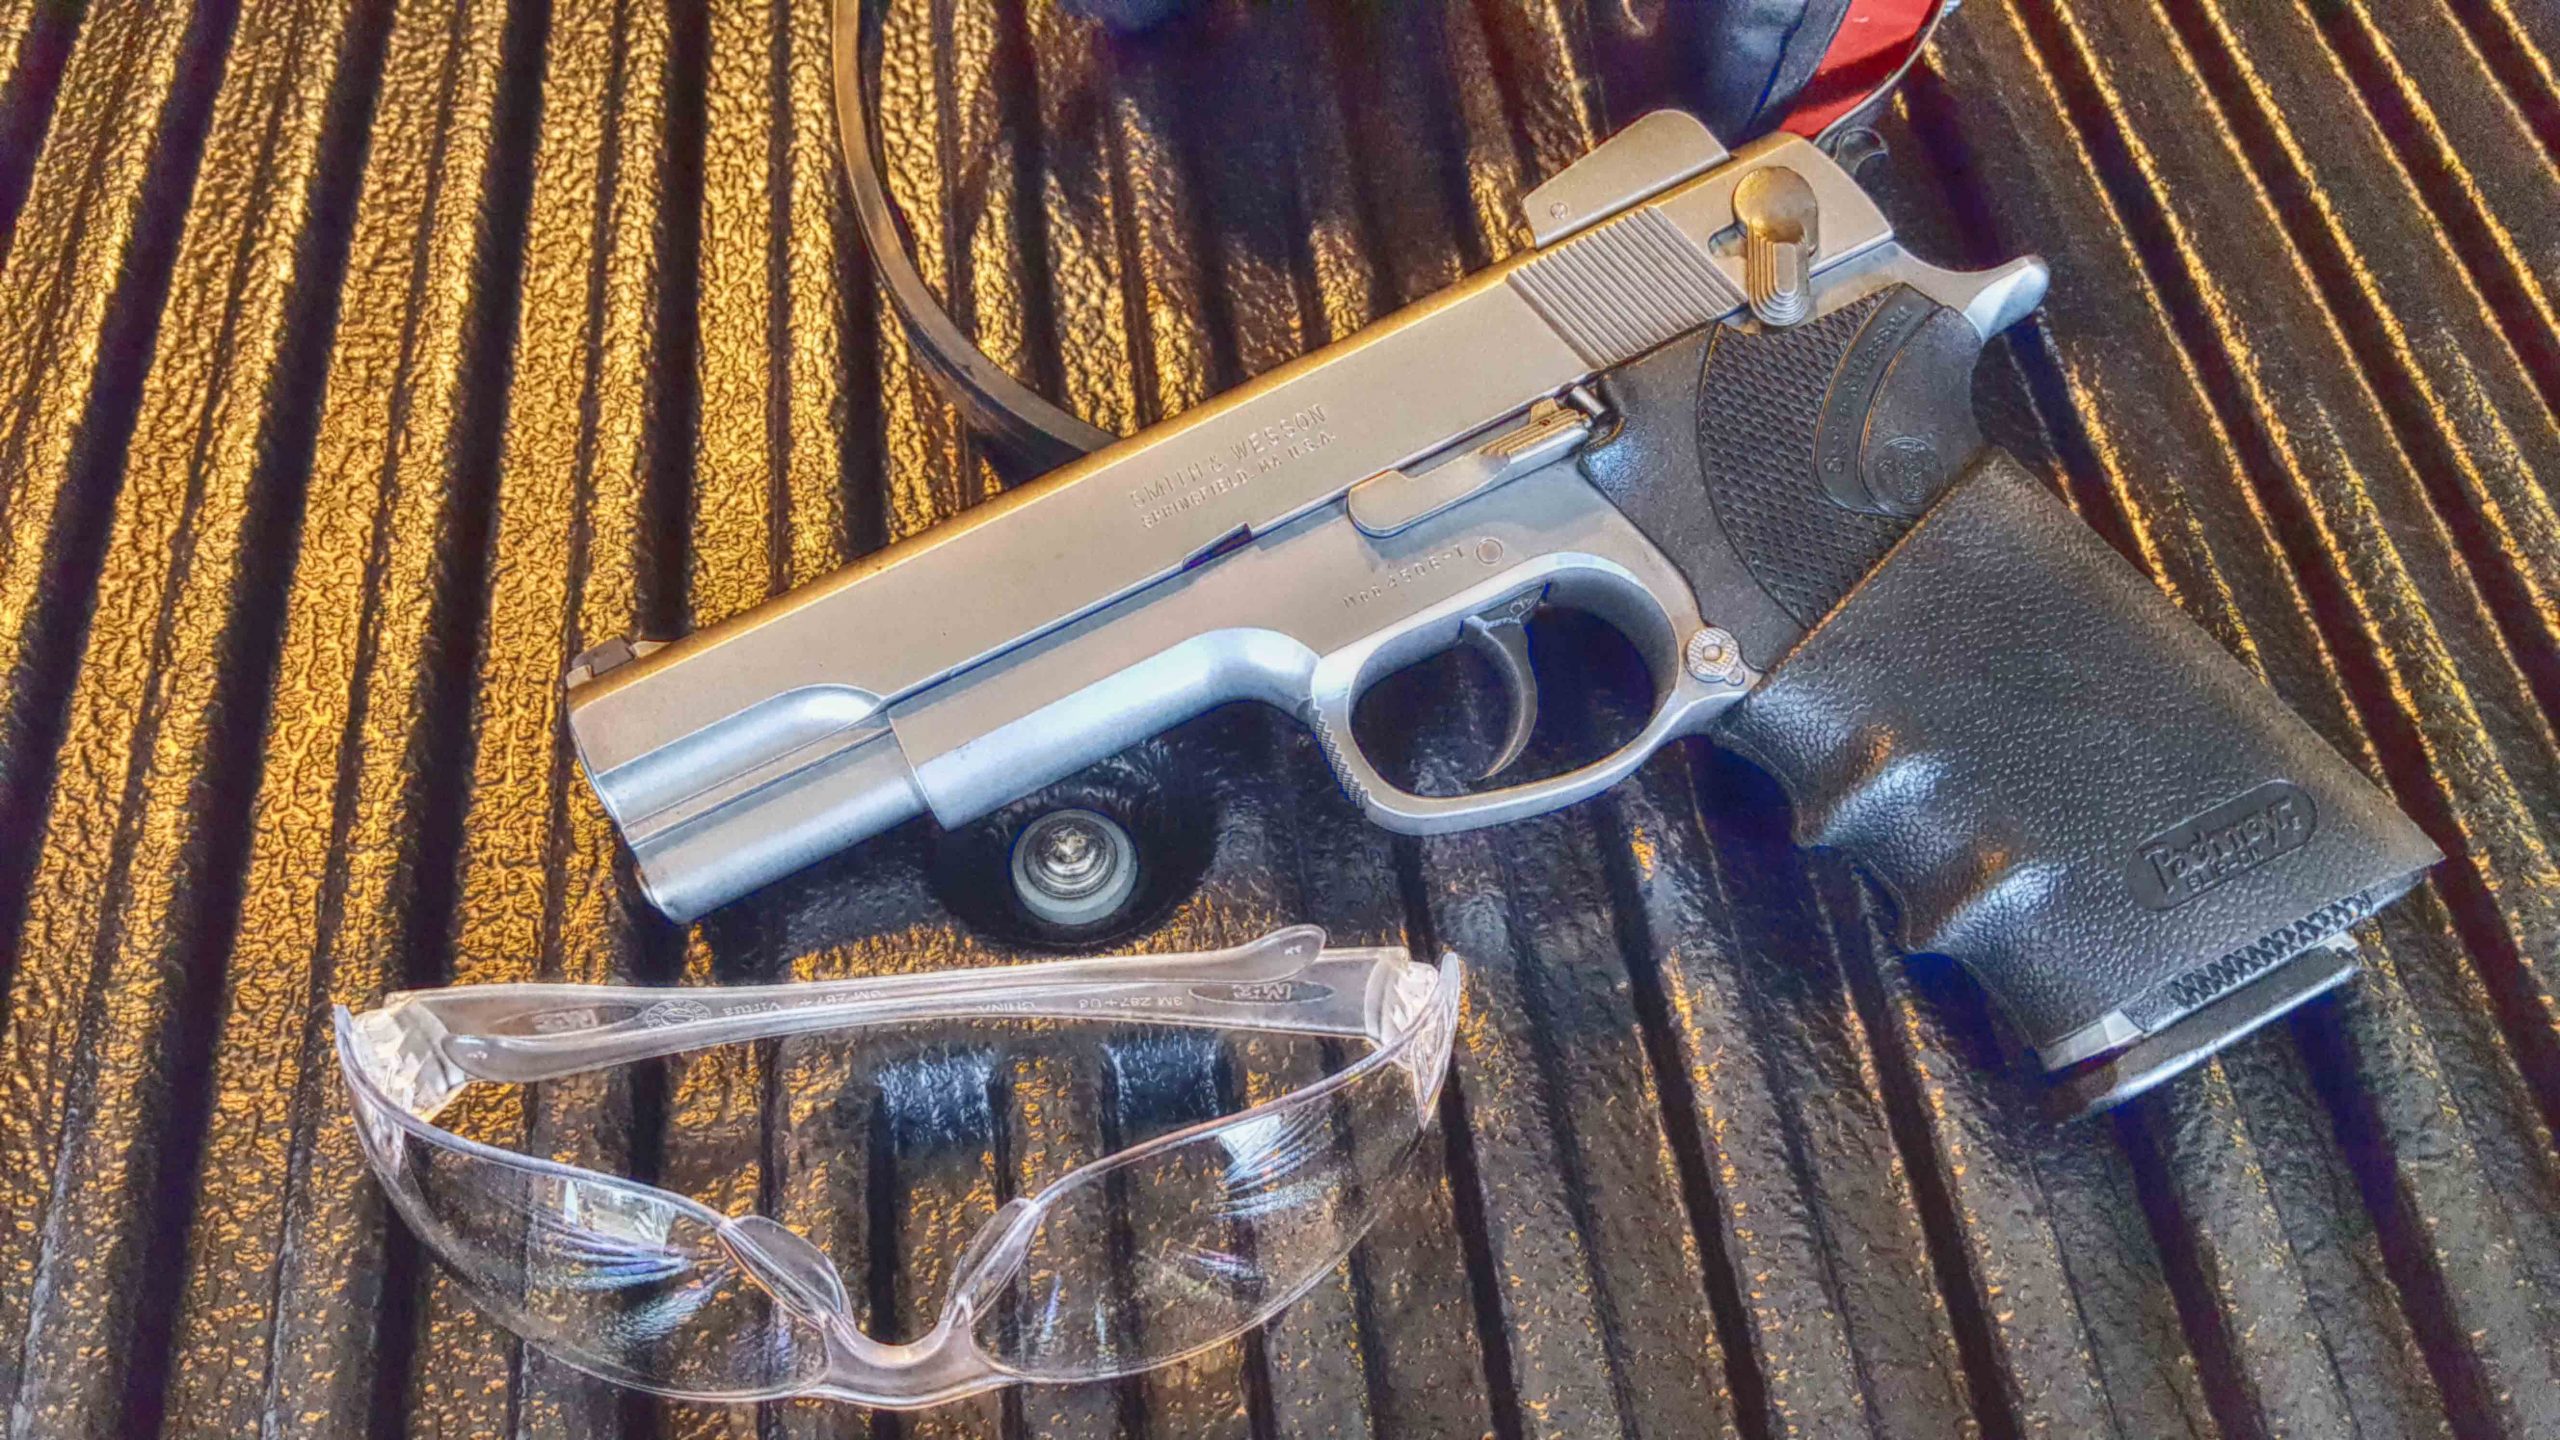 The Smith and Wesson 4506 is a classic semiautomatic pistol known for reliability.